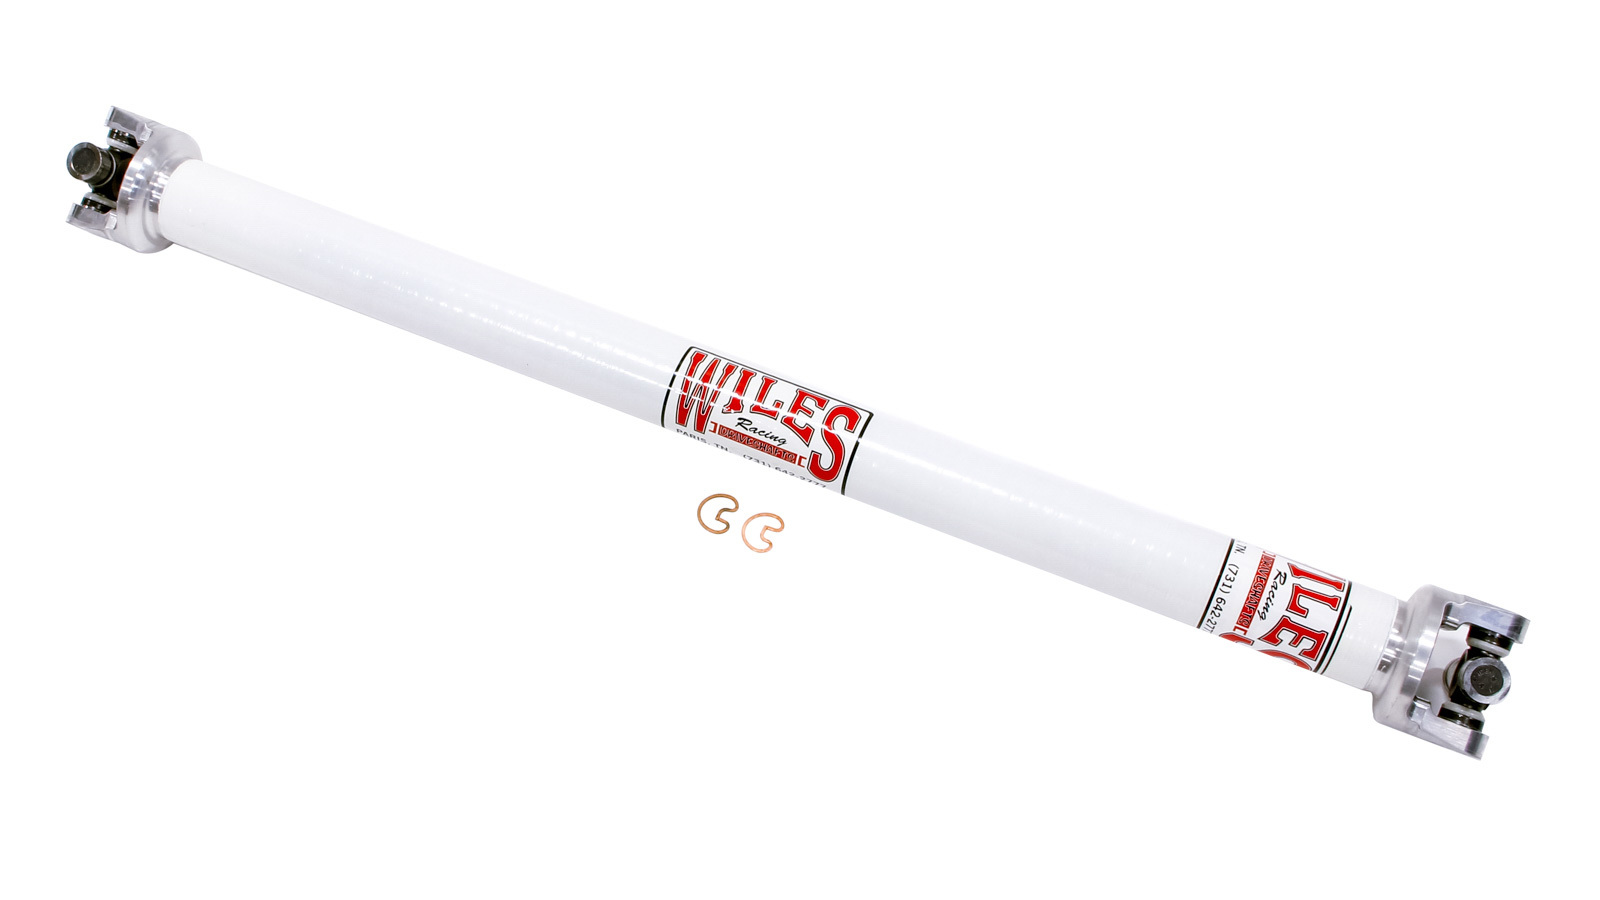 Wiles Driveshaft CF225320 Drive Shaft, 32 in Long, 2.25 in OD, 1310 U-Joints, Carbon Fiber, White Paint, Universal, Each